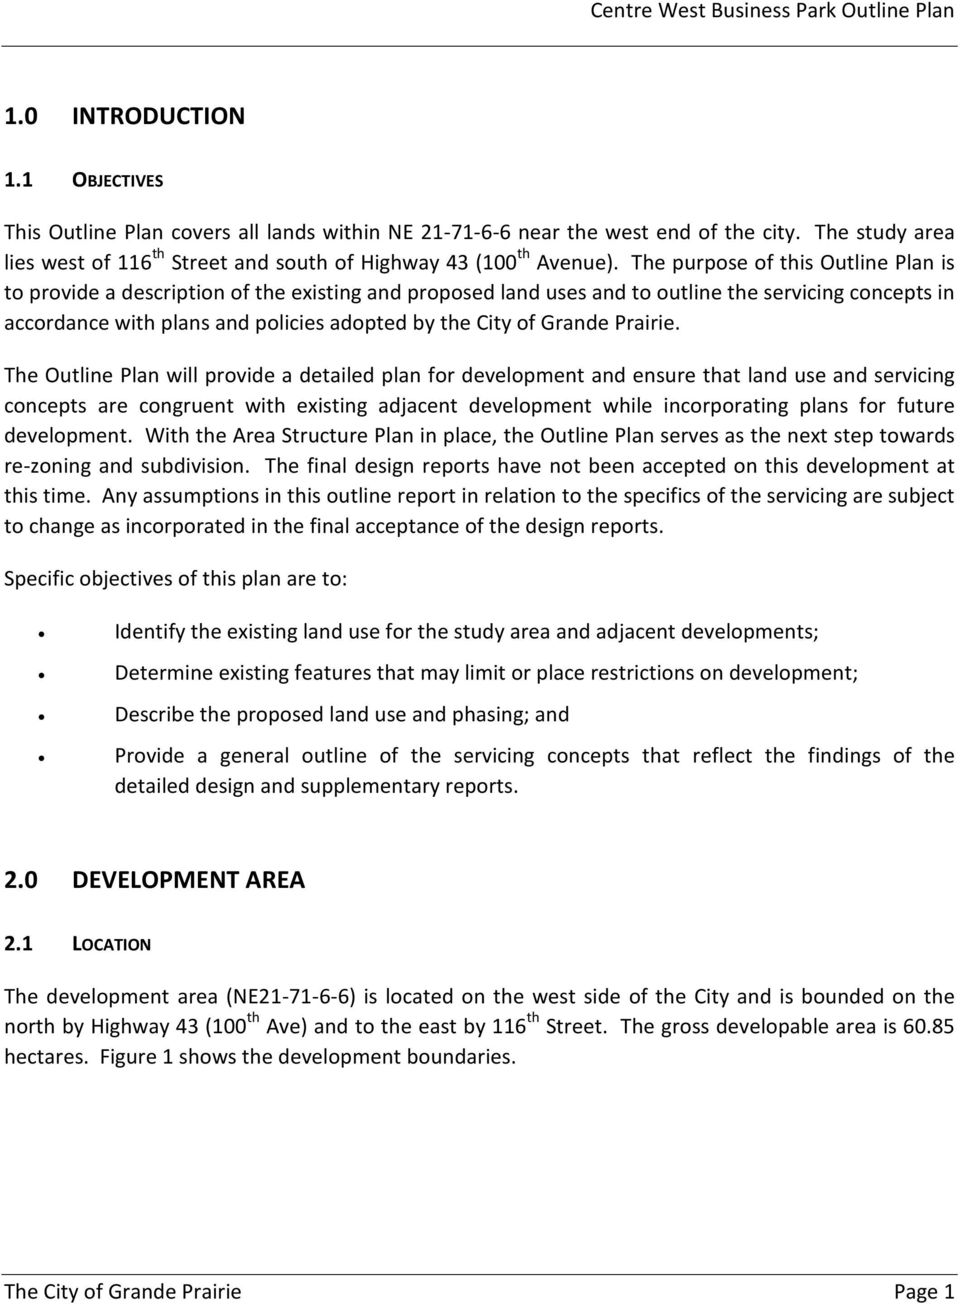 The purpose of this Outline Plan is to provide a description of the existing and proposed land uses and to outline the servicing concepts in accordance with plans and policies adopted by the City of